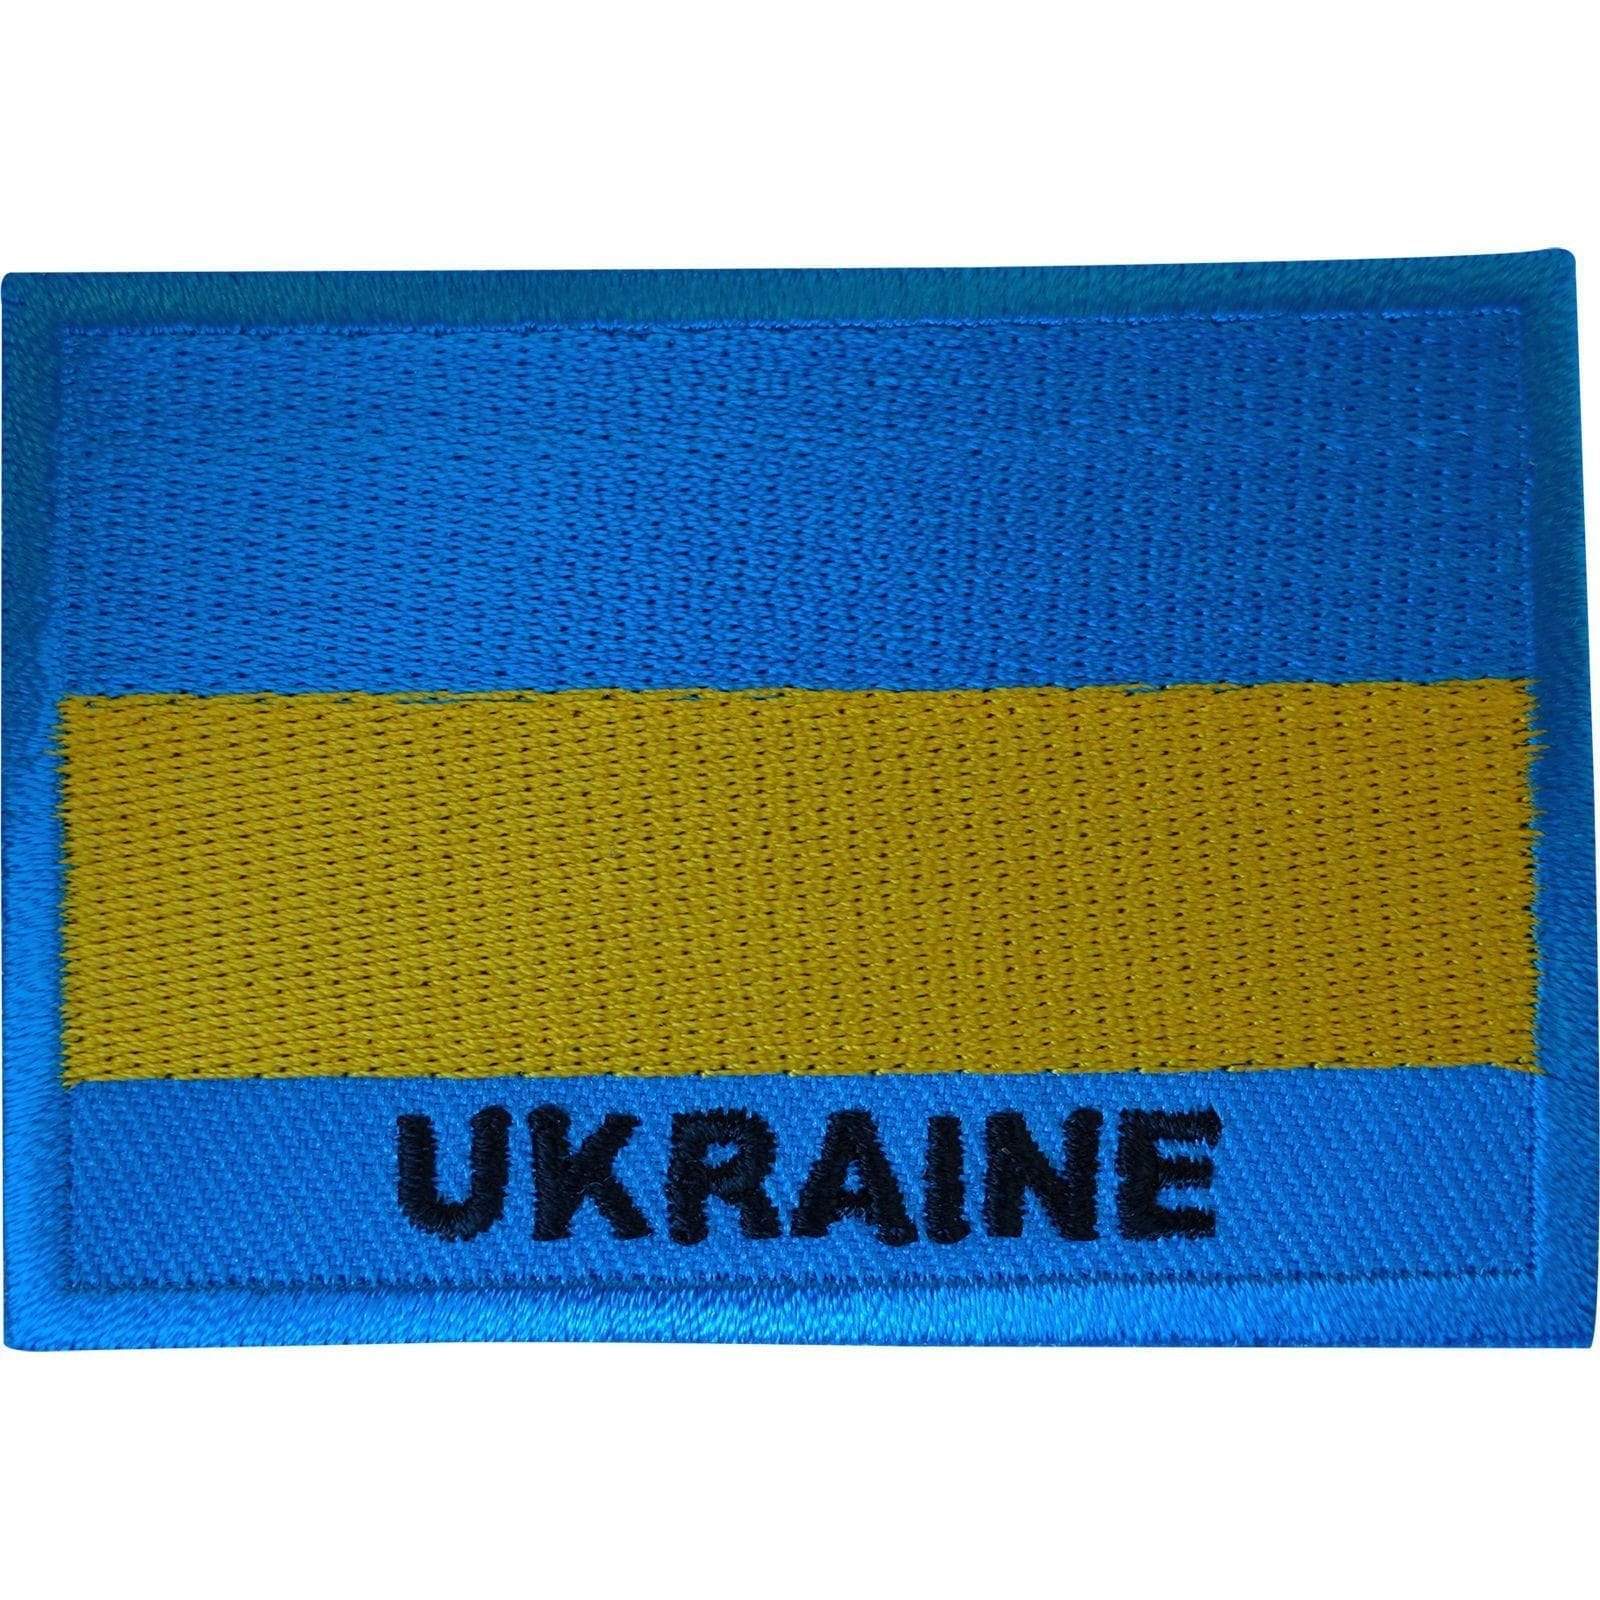 Ukraine Flag Patch Ukrainian Iron On Sew On Clothes Bag Crafts Embroidered Badge